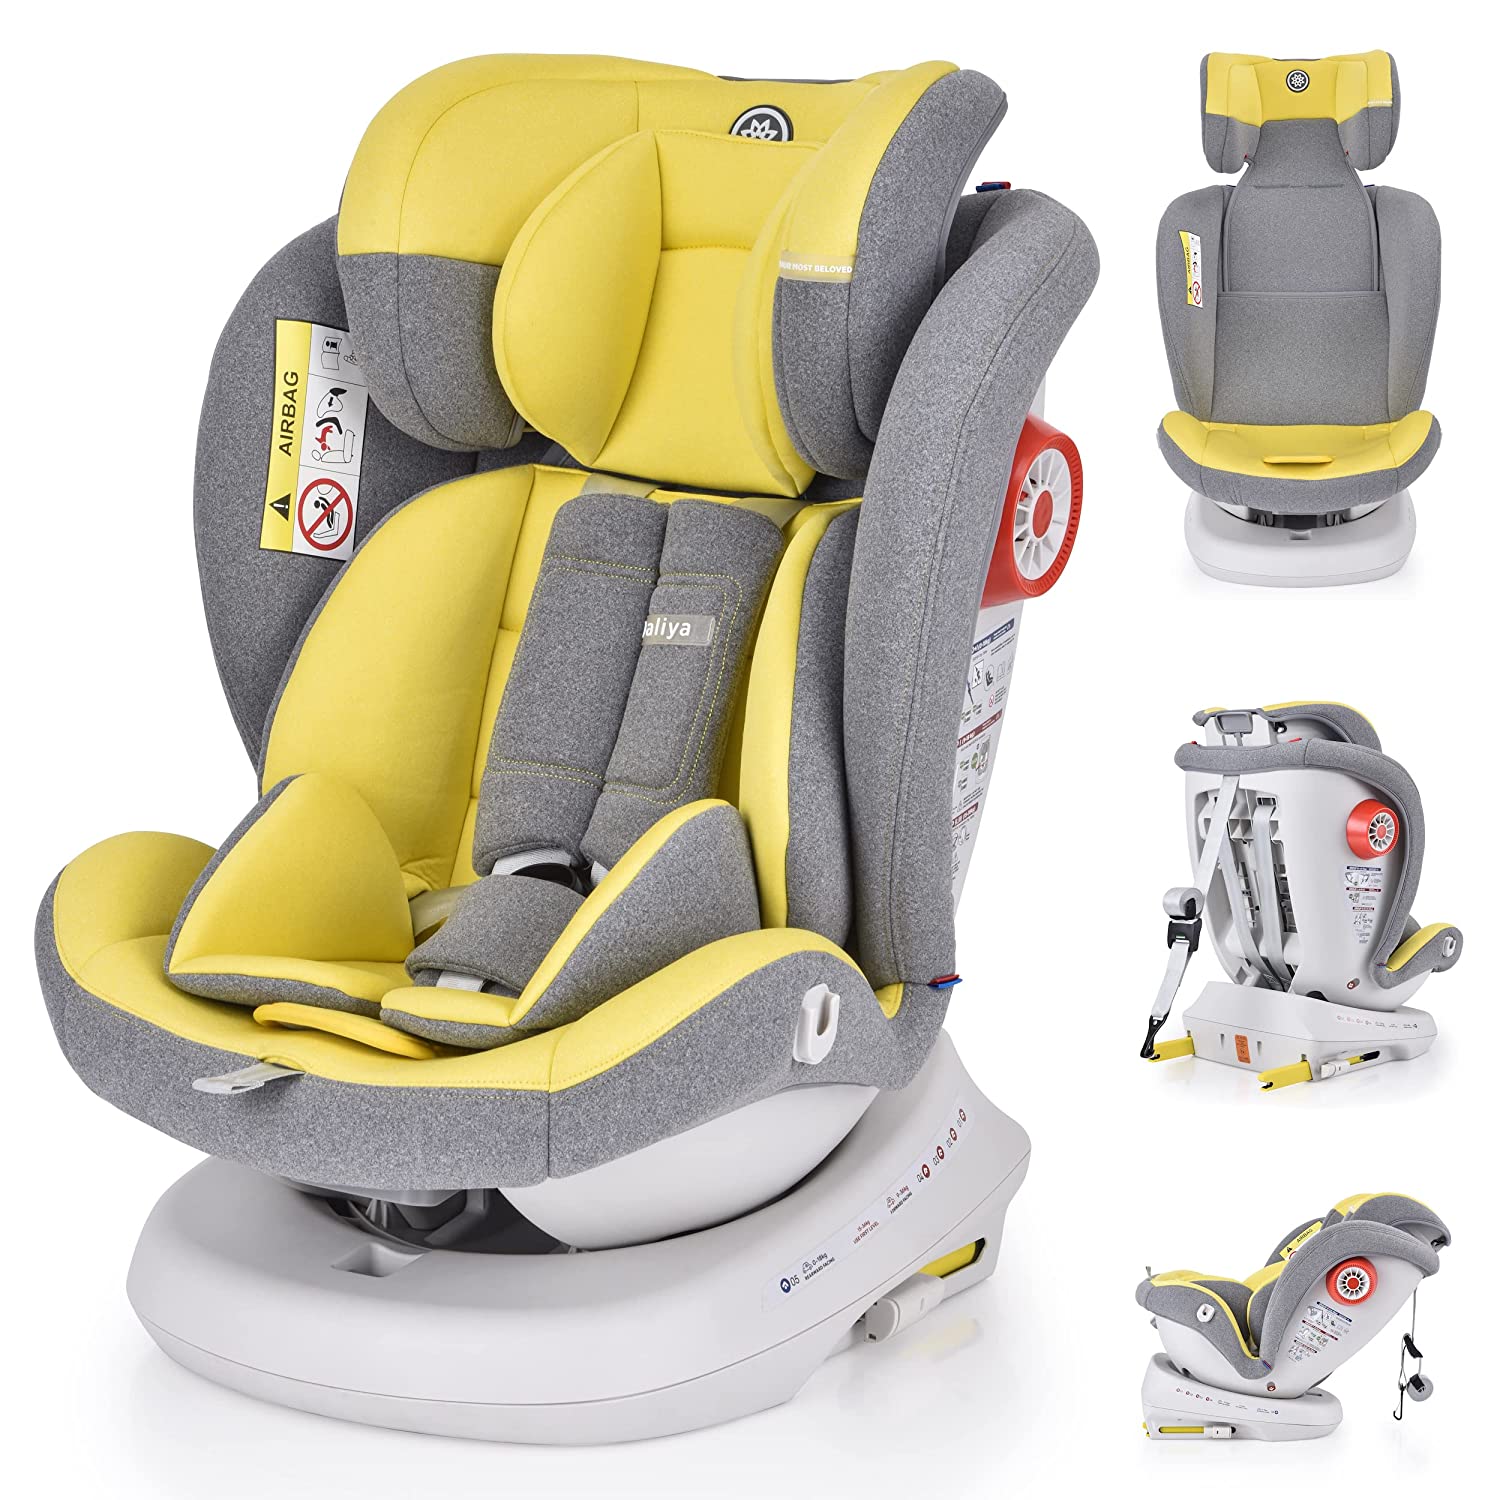 Daliya® ROTAZIONE Child Seat 0-36 kg with Isofix - Side Impact Protection (SIP) - Top Tether - 360° Rotation - 5-Point Harness - Drink Holder - Sun Cover - Baby Car Seat Group 0+ / I/II / III (Yellow)